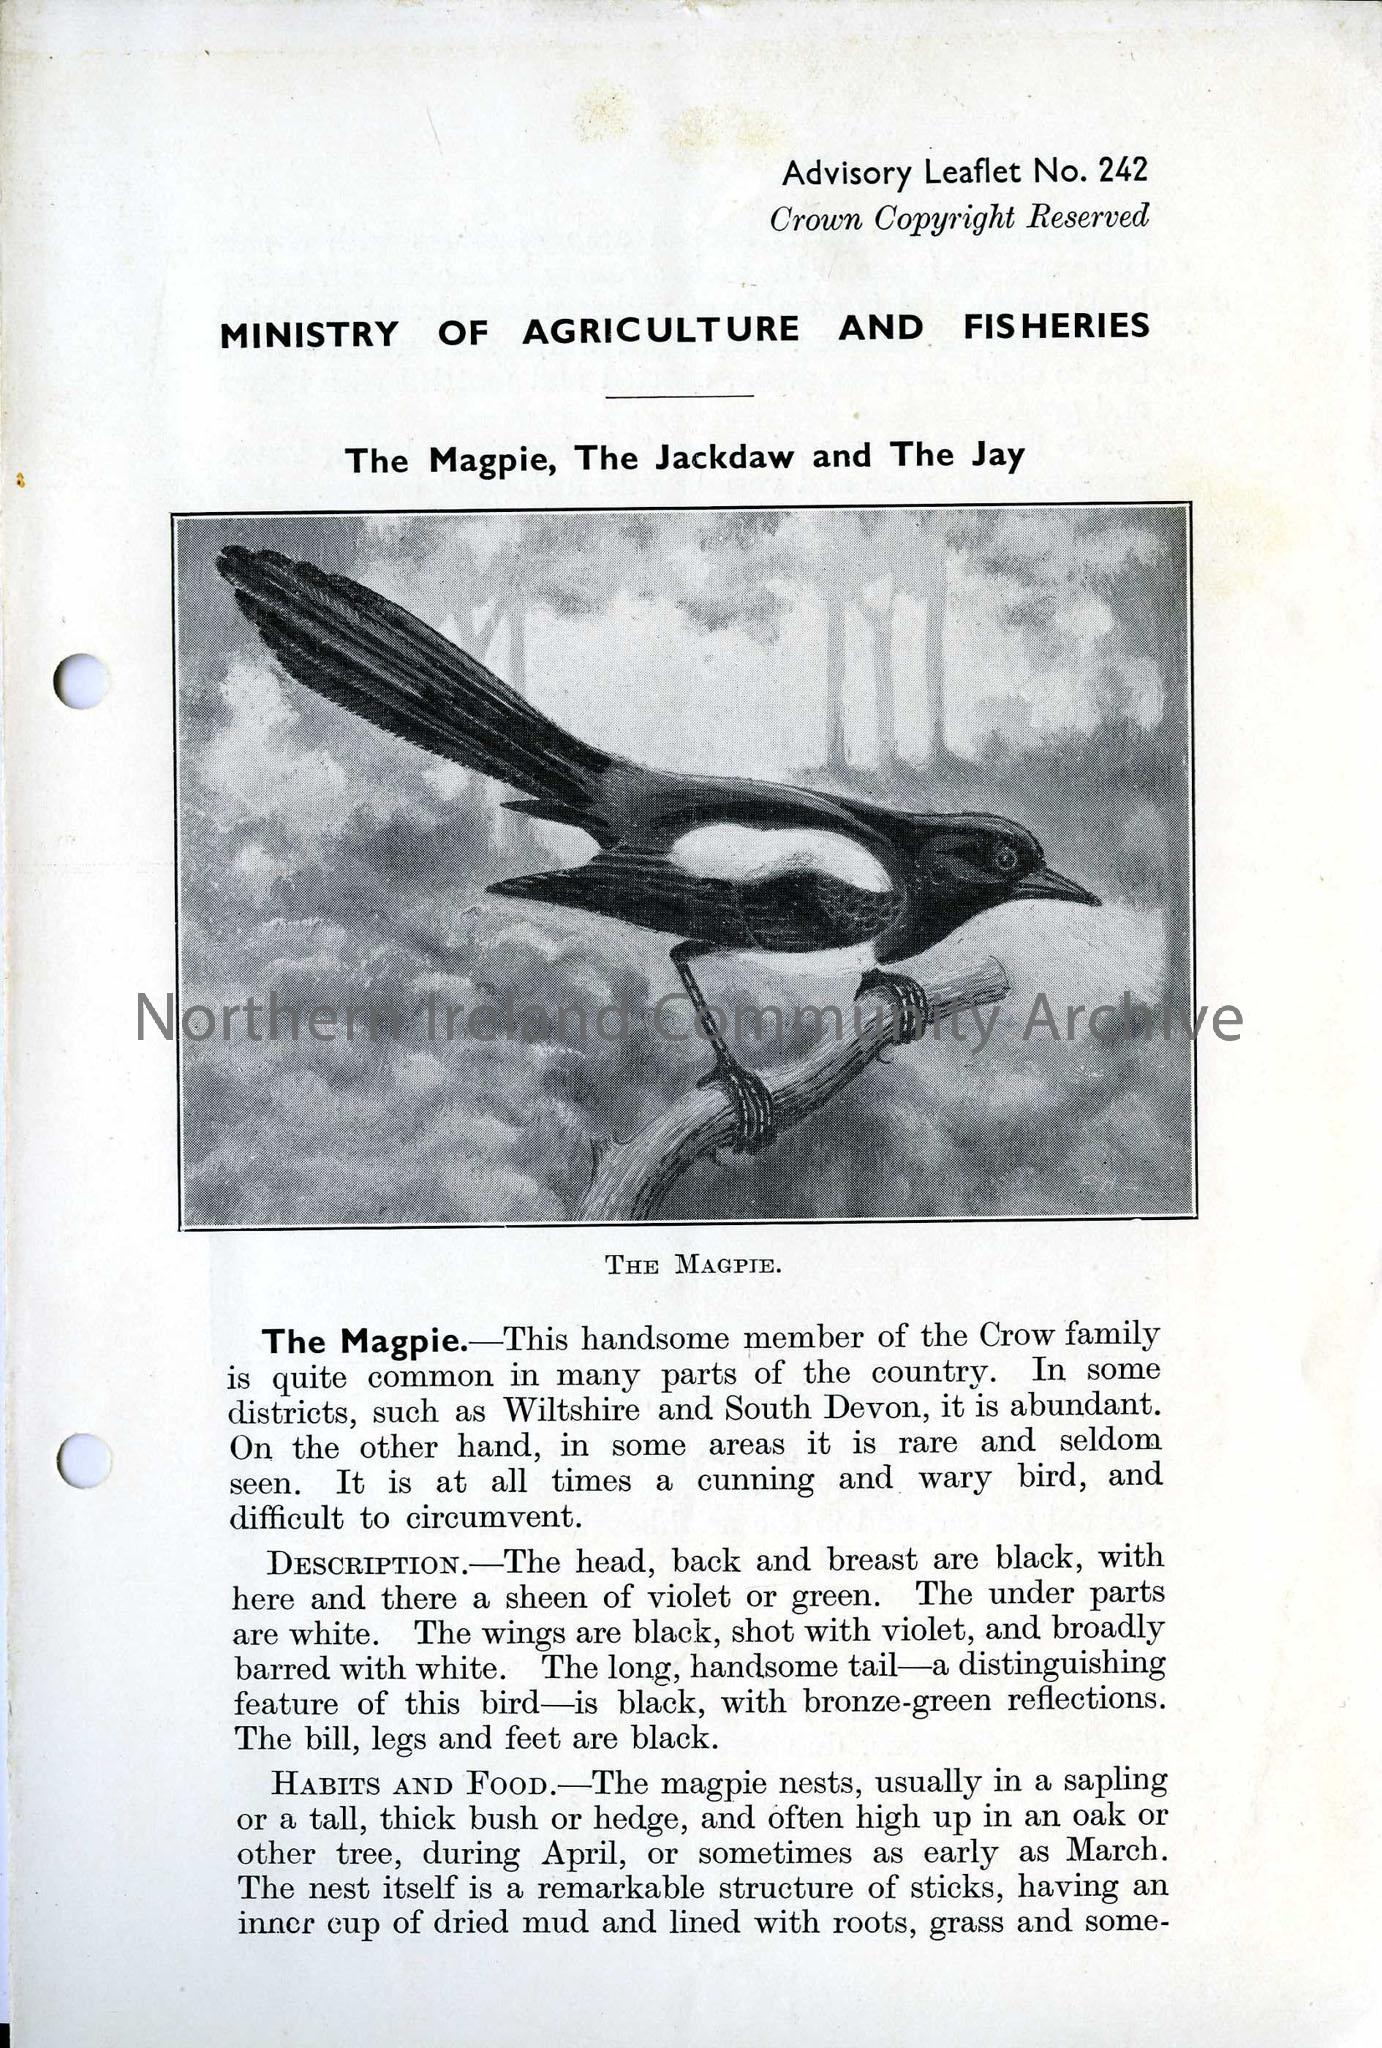 The Magpie, the Jackdaw and the Jay